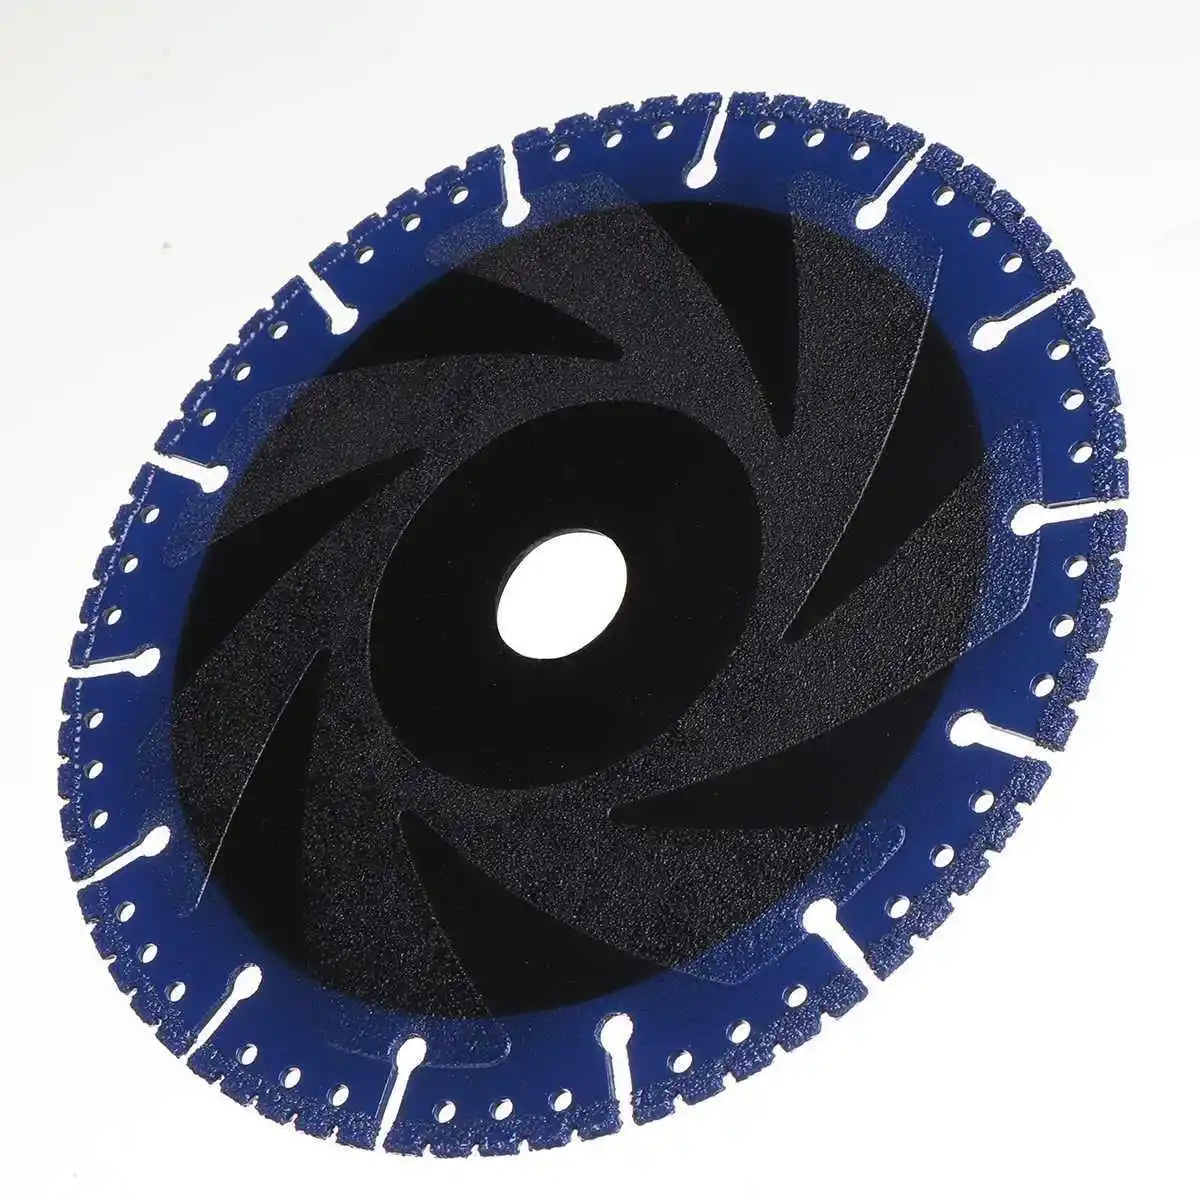 125mm 230mm Super Thin Diamond Tile Blade Cutting Disc Saw Blades Grinder Grinding Wheel for Cutting Porcelain Tile Stone Wood